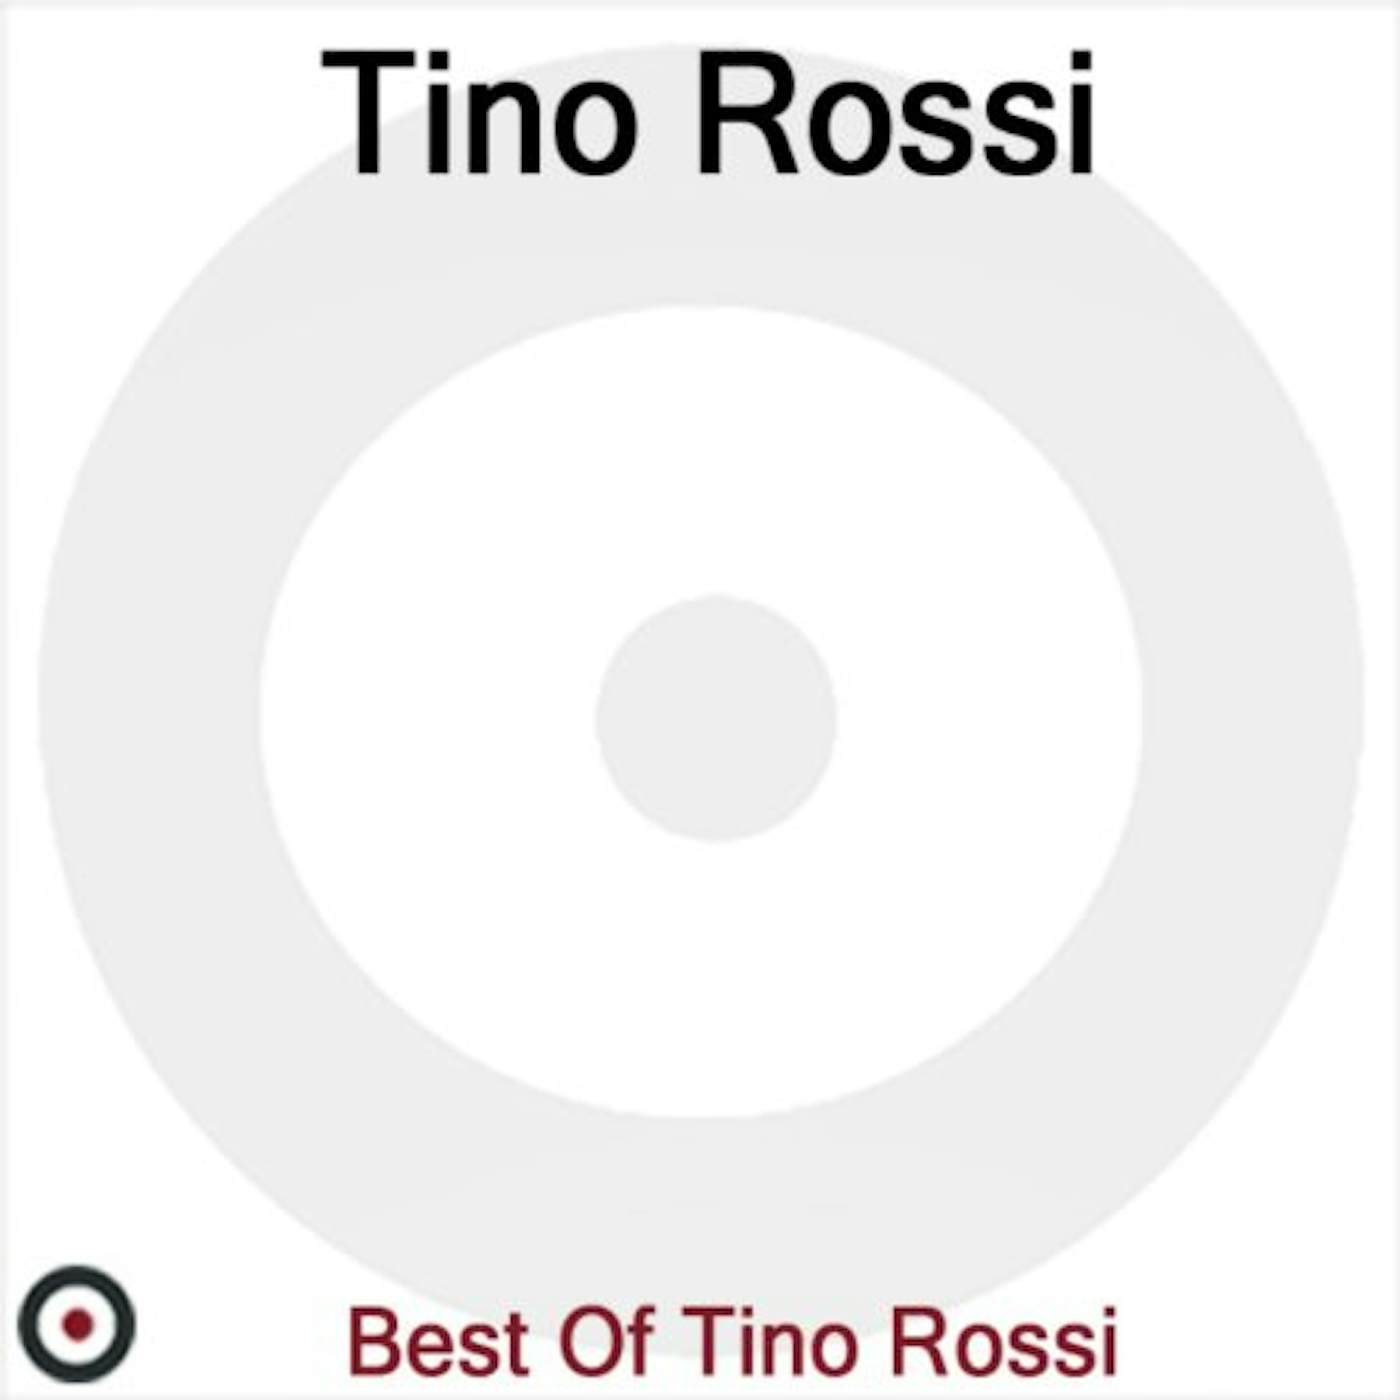 Tino Rossi BEST OF CD